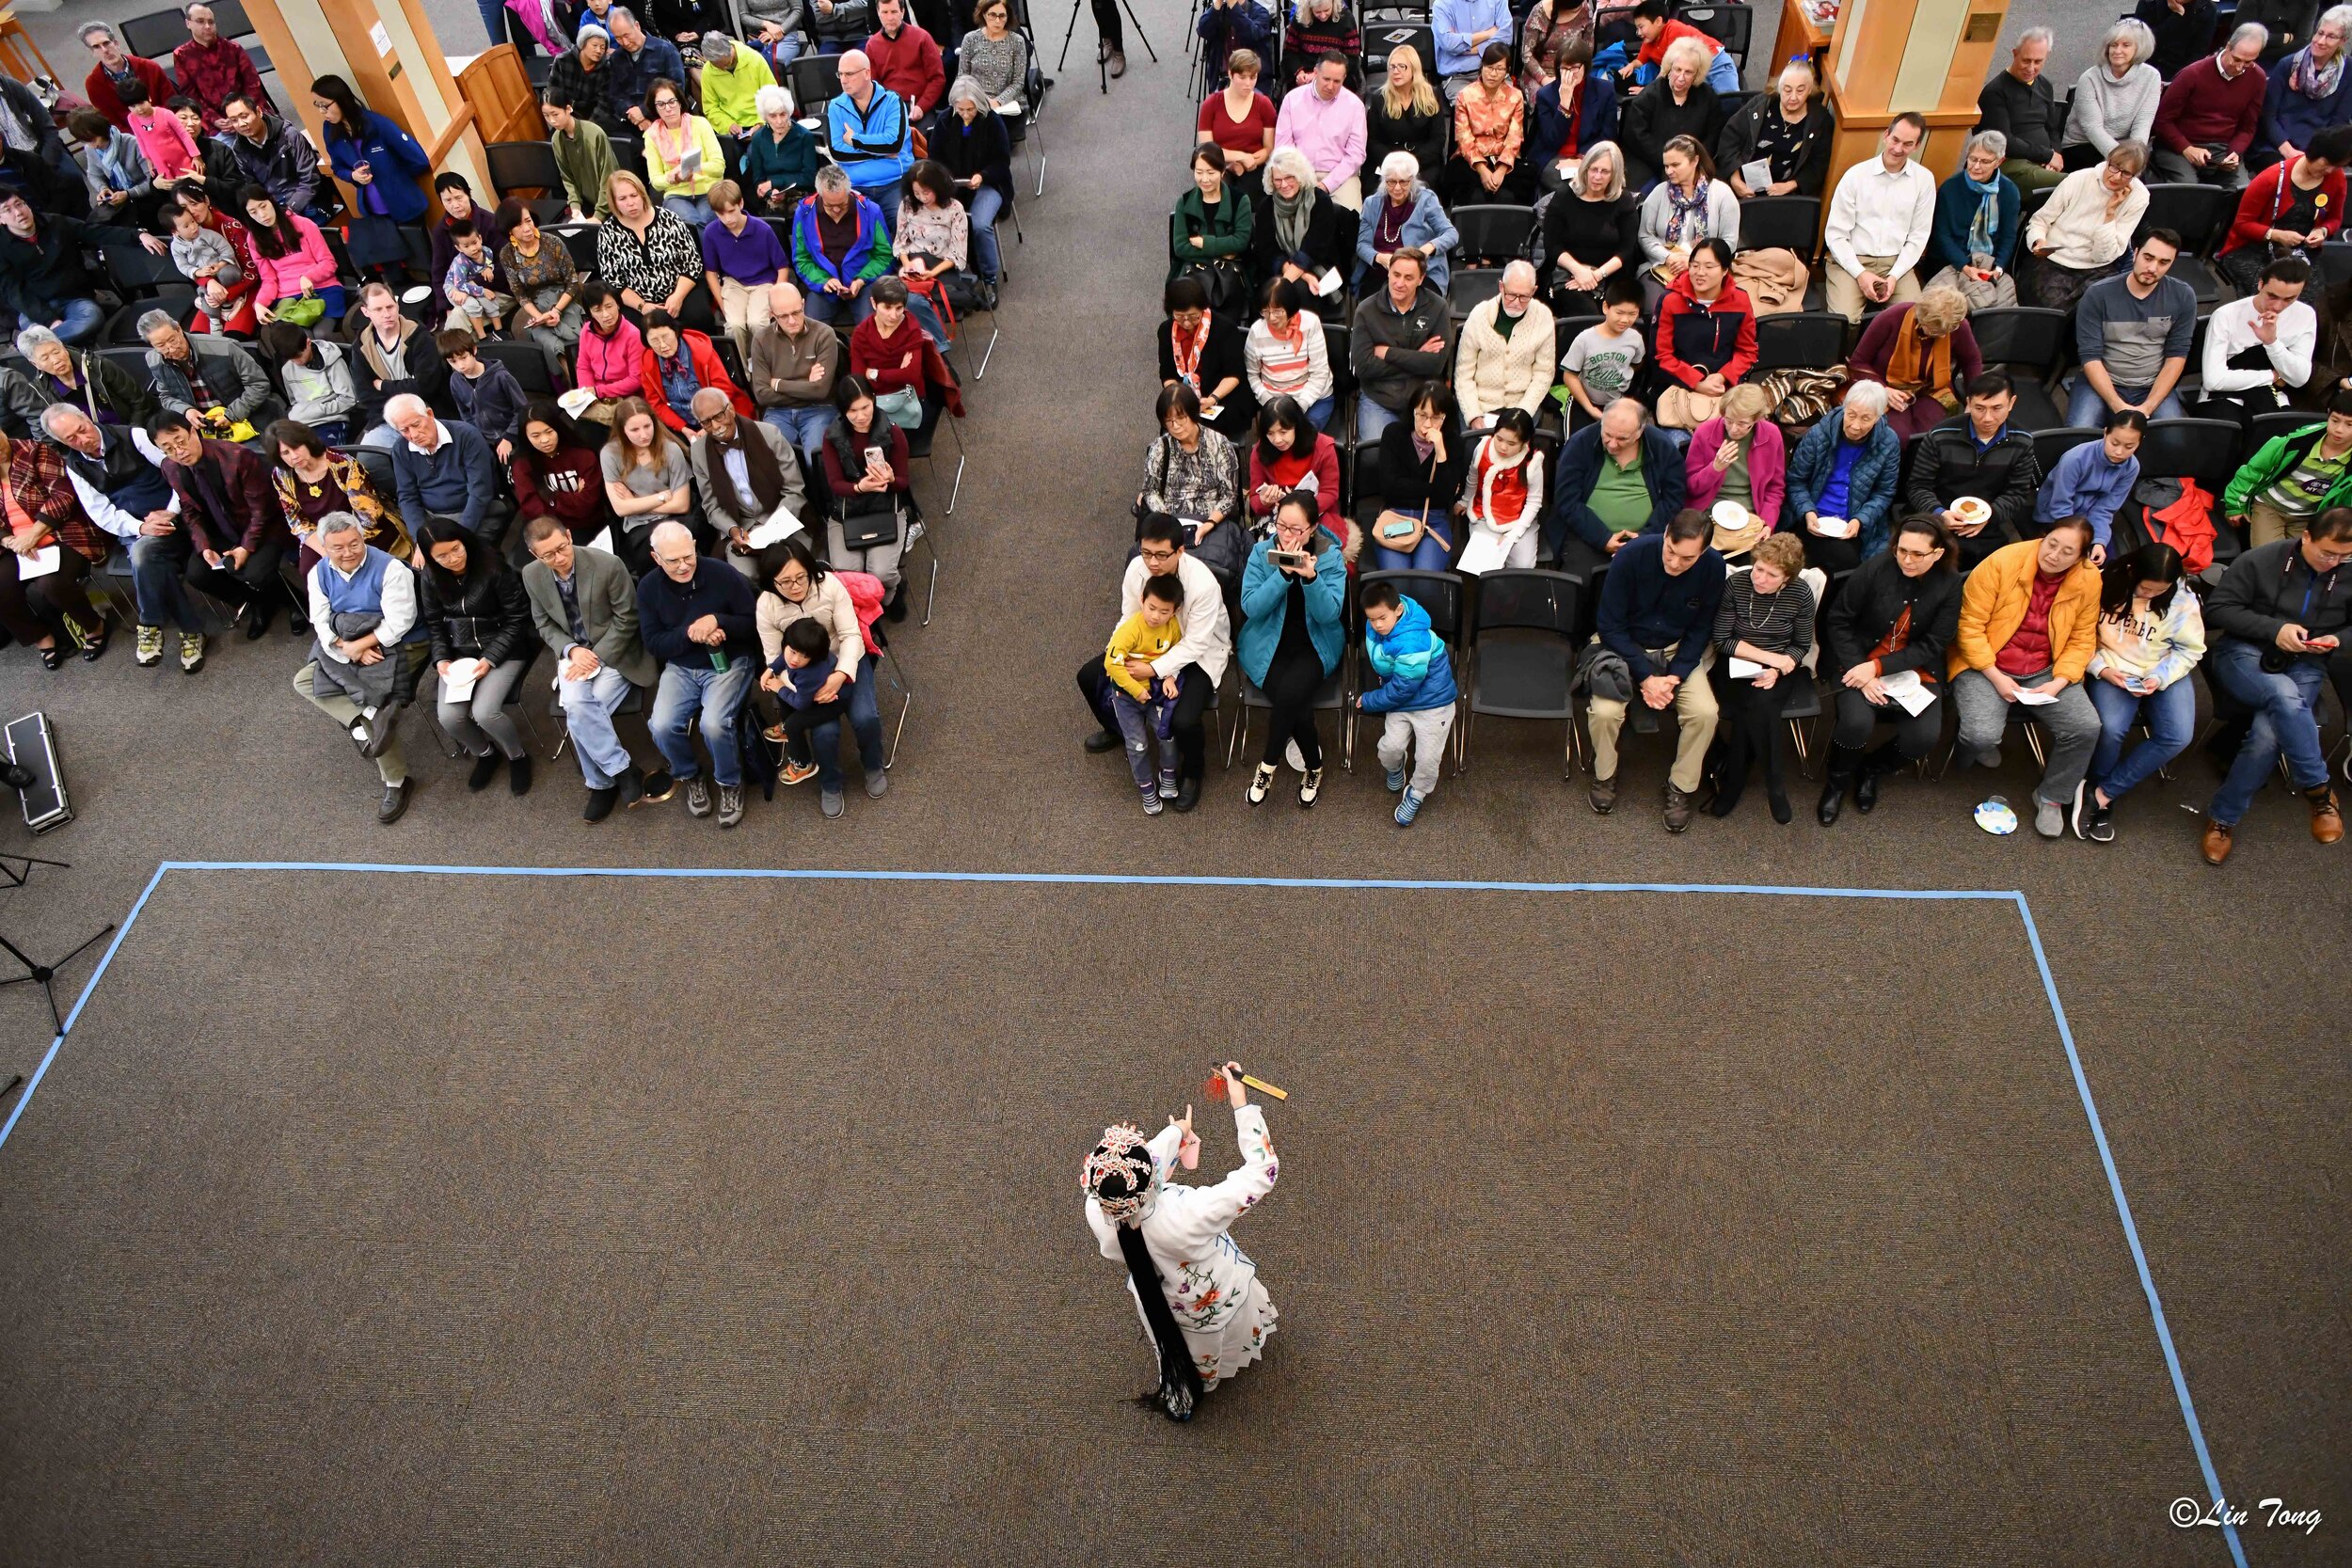  Overhead shot of Chinese woman folk dancing in front of a crowd 